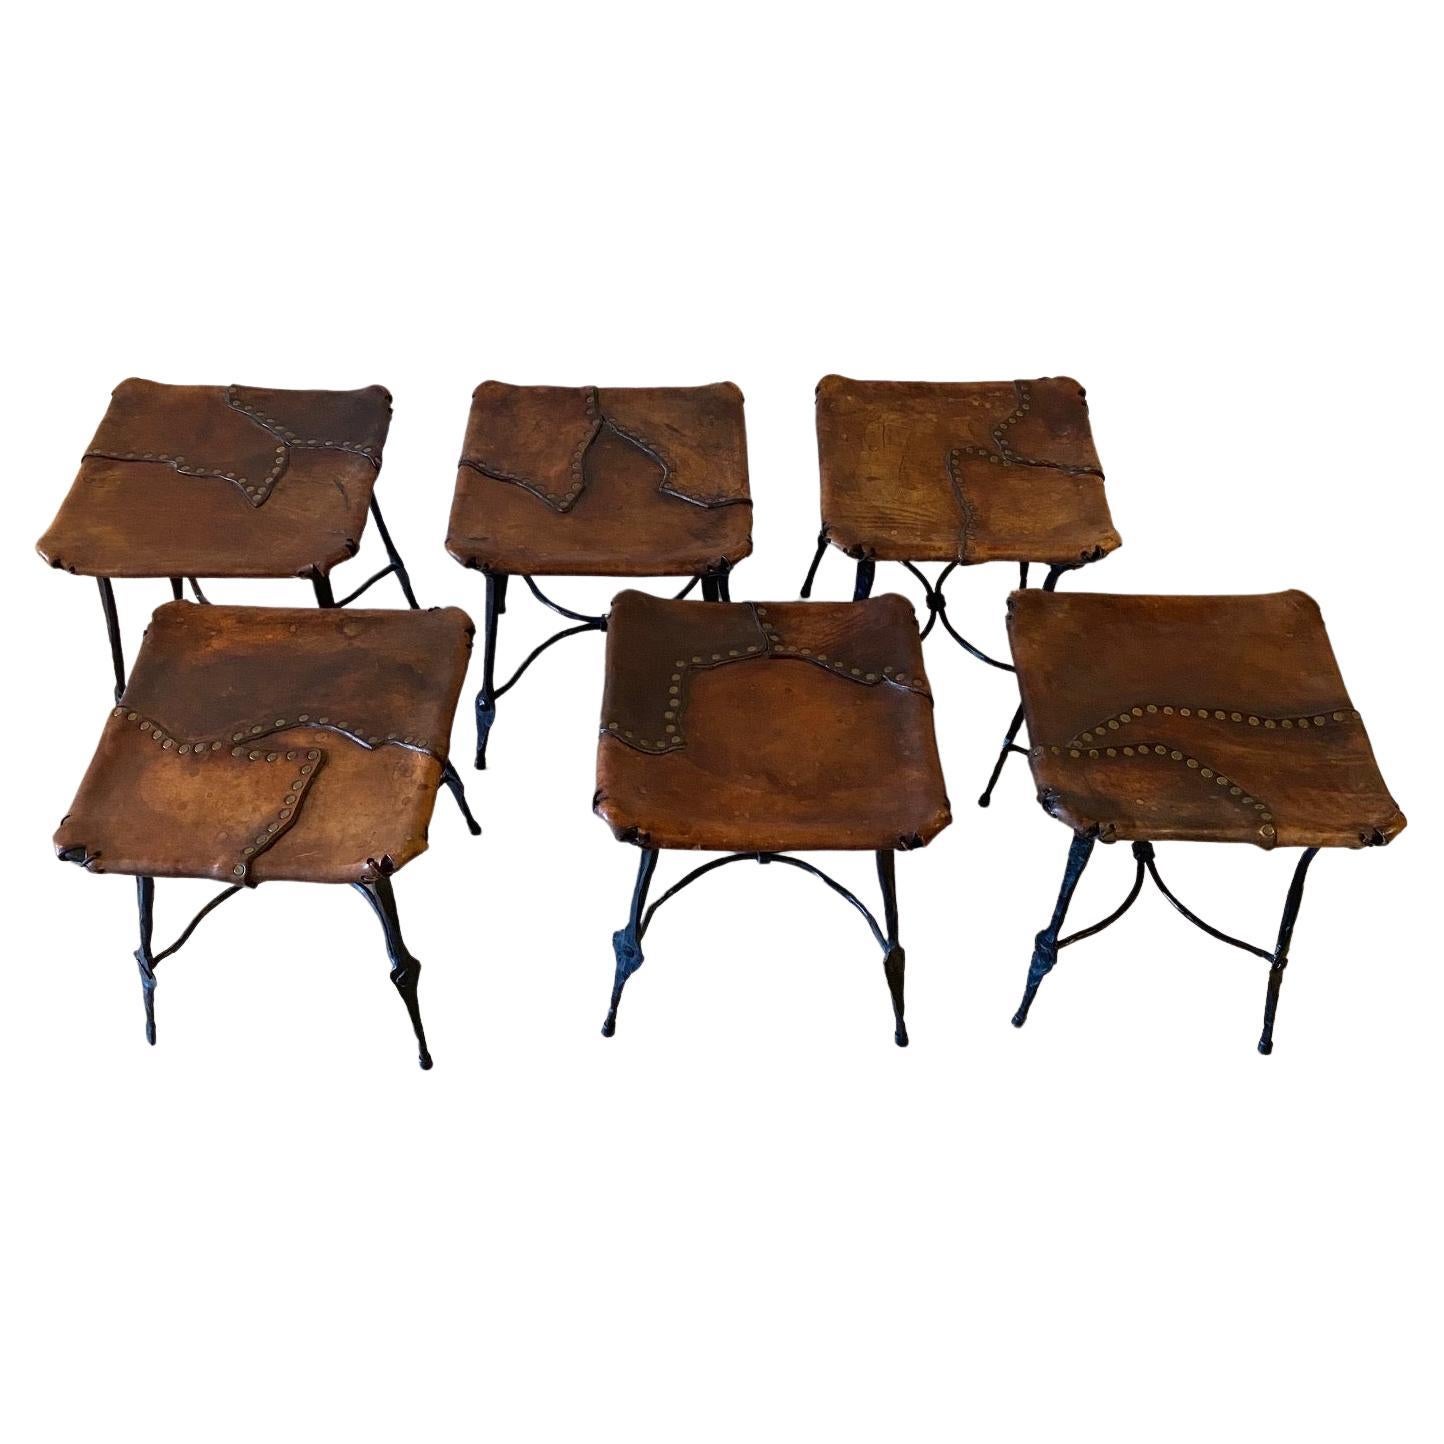 
This set of 6 Stools is rare. It has been made in France in the 970's.
It is signed. It is in Wrought Iron and Leather, Brown Color.

Born in 1931 in Cote d’Azur, Francois Thevenin is an exceptional architect, sculptor, and furniture designer who